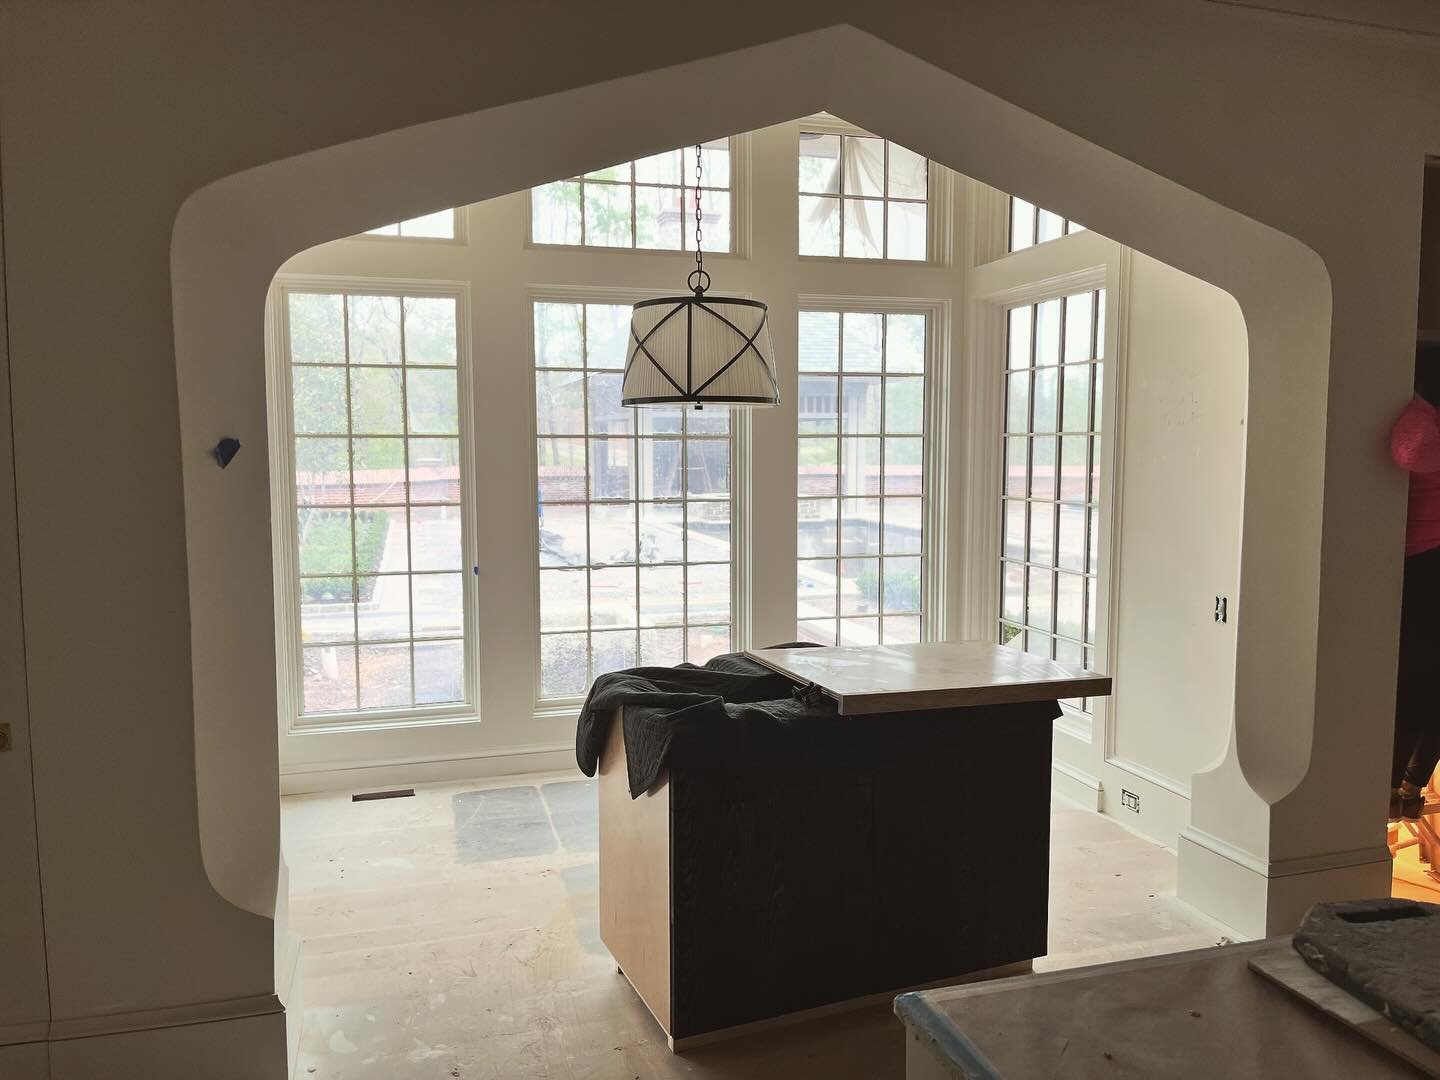 Progress on our Shoal Creek Tudor, with a hazy peek through the bay window at the fabulous work of @stephen_w_hackney 
.
.
.
📸: @smoff15 
#architecture #tudor #arch #baywindow #kitchen #breakfastbay #light #residentialdesign #traditionalarchitecture